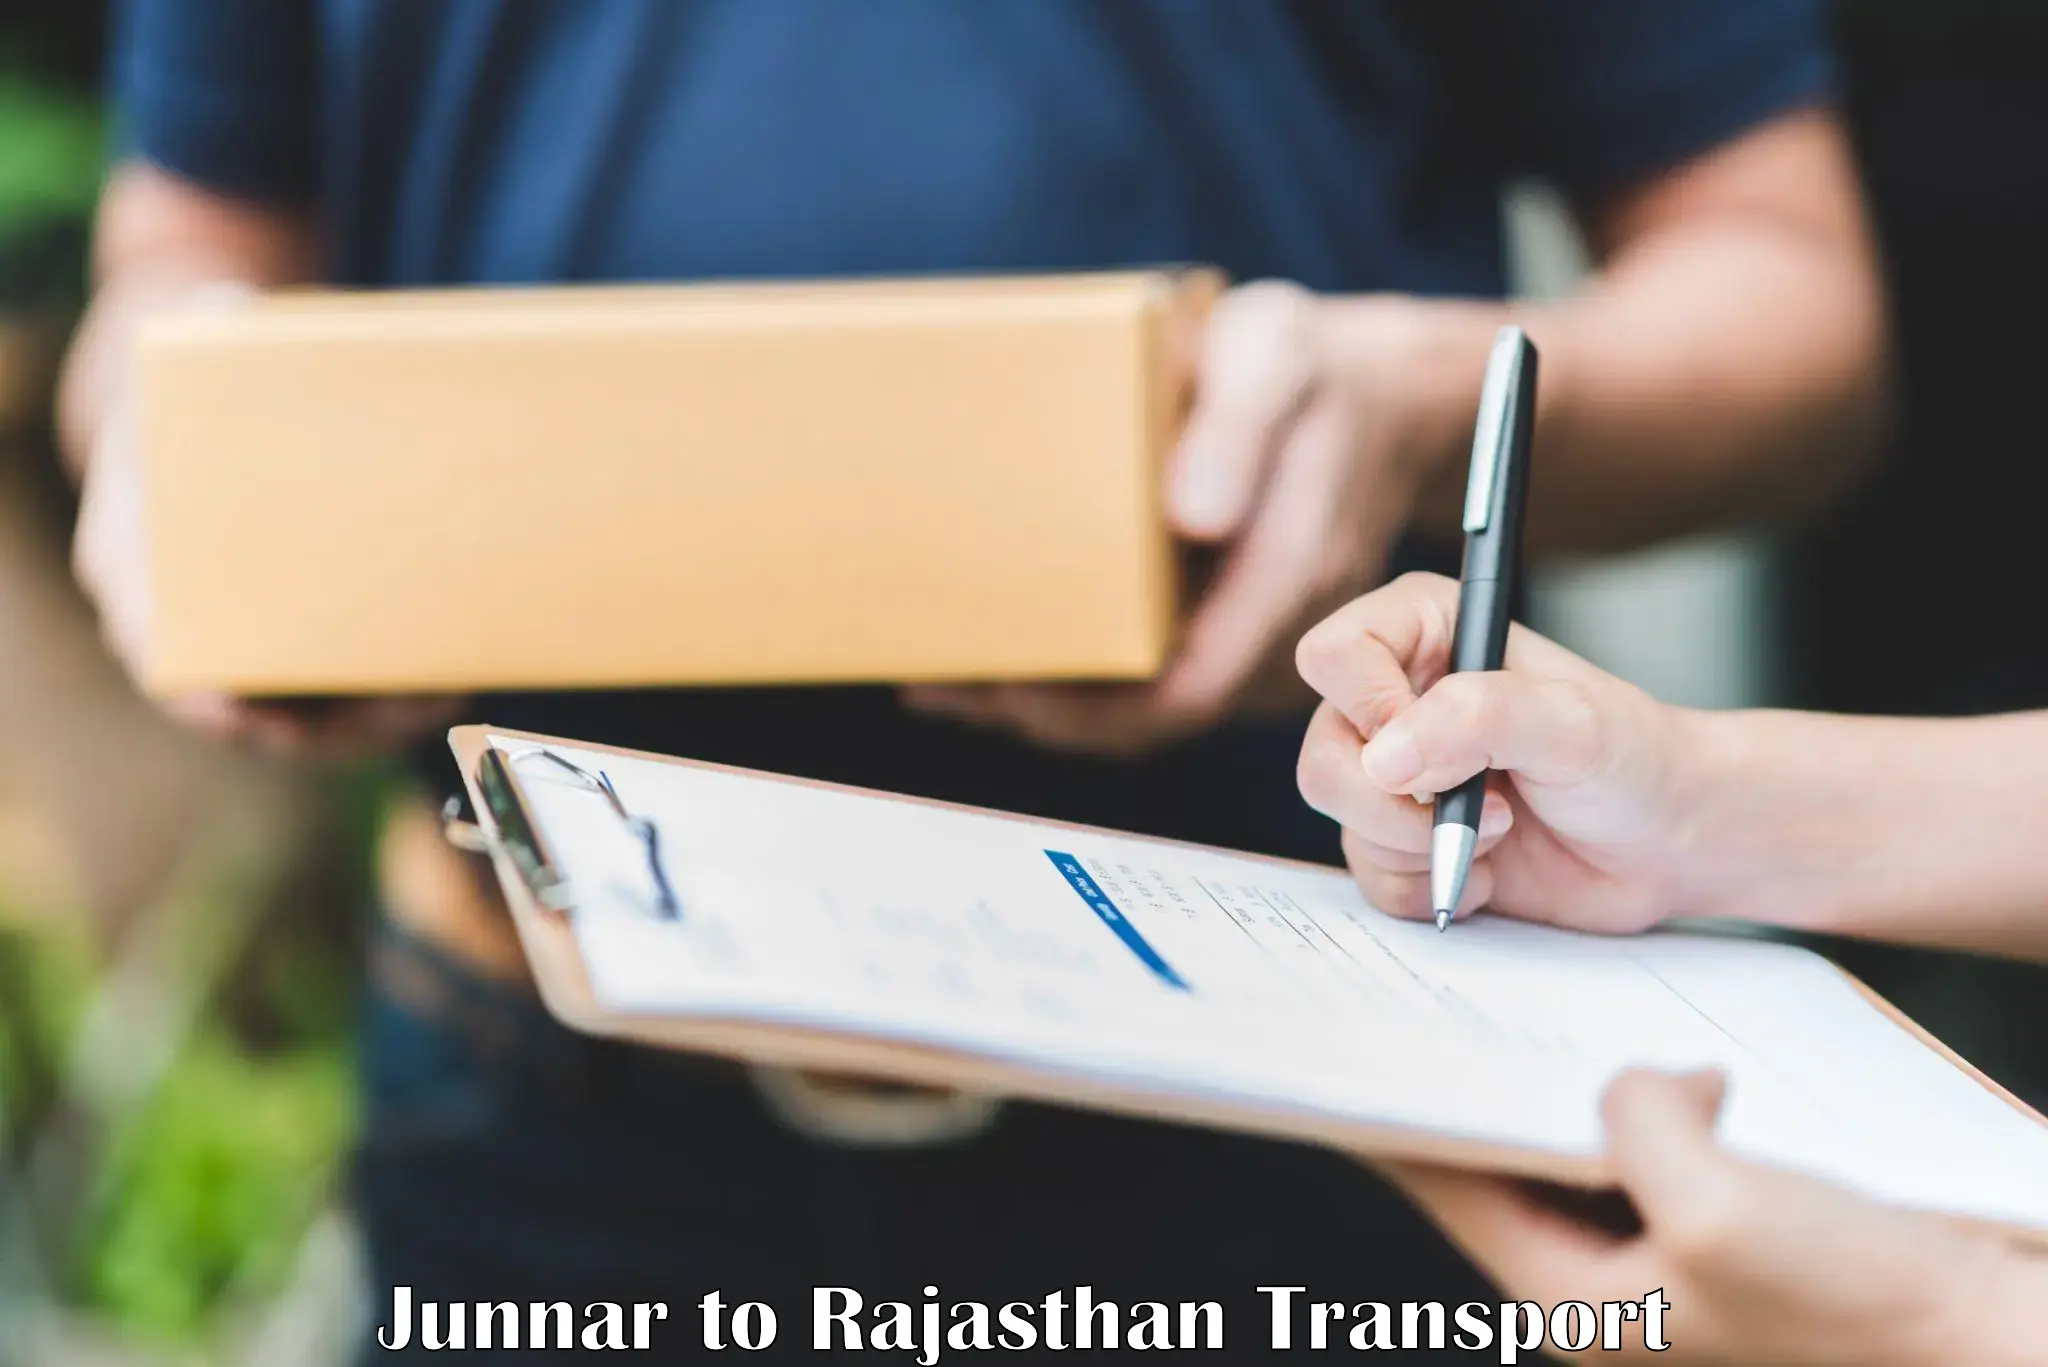 Nearby transport service Junnar to Rajasthan